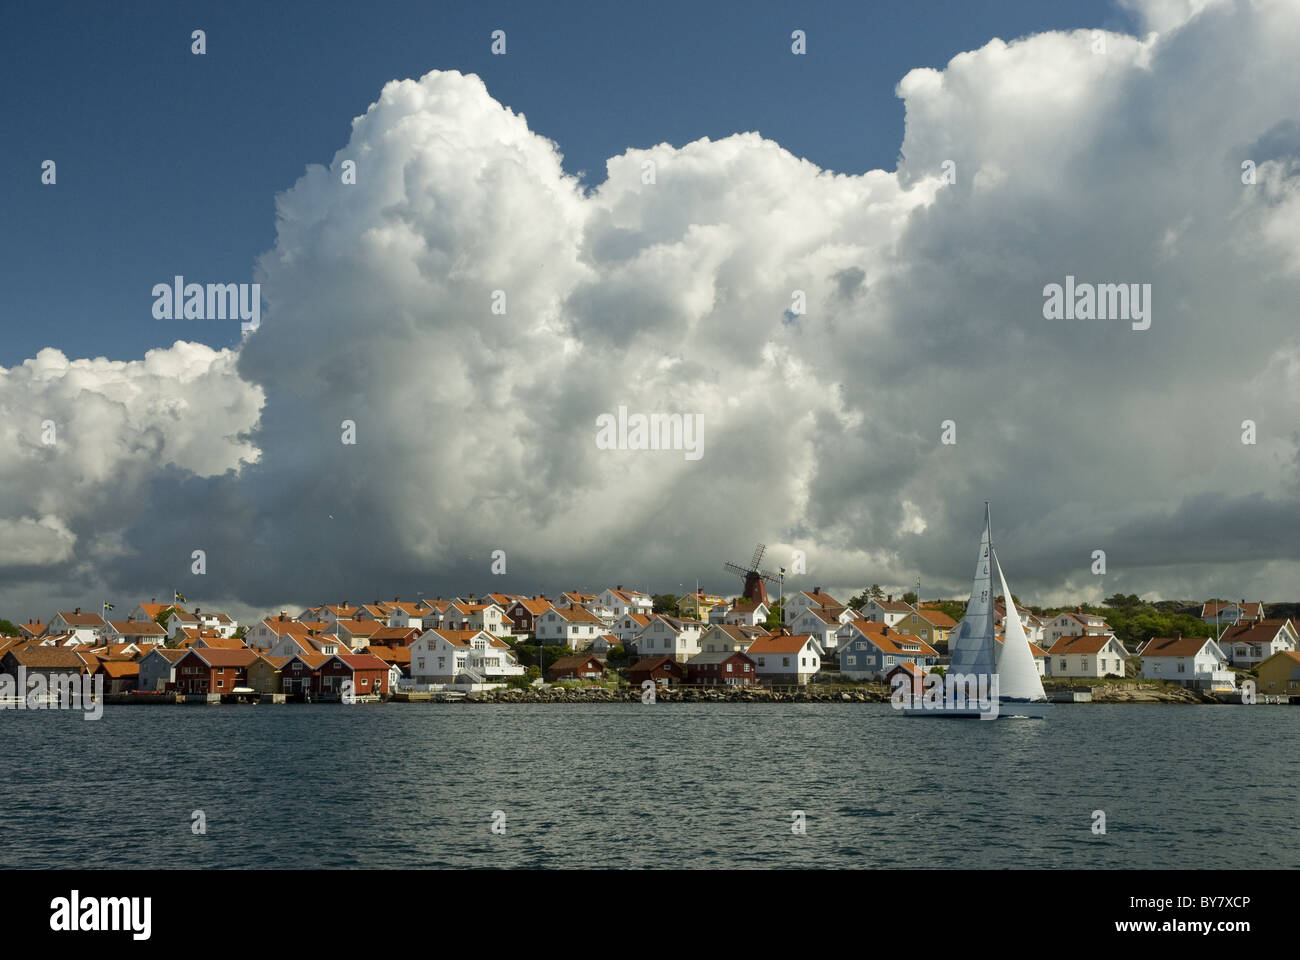 A boat is sailing by one of many small coastal communities on the west coast of Sweden. Thunder clouds are building in the heat. Stock Photo